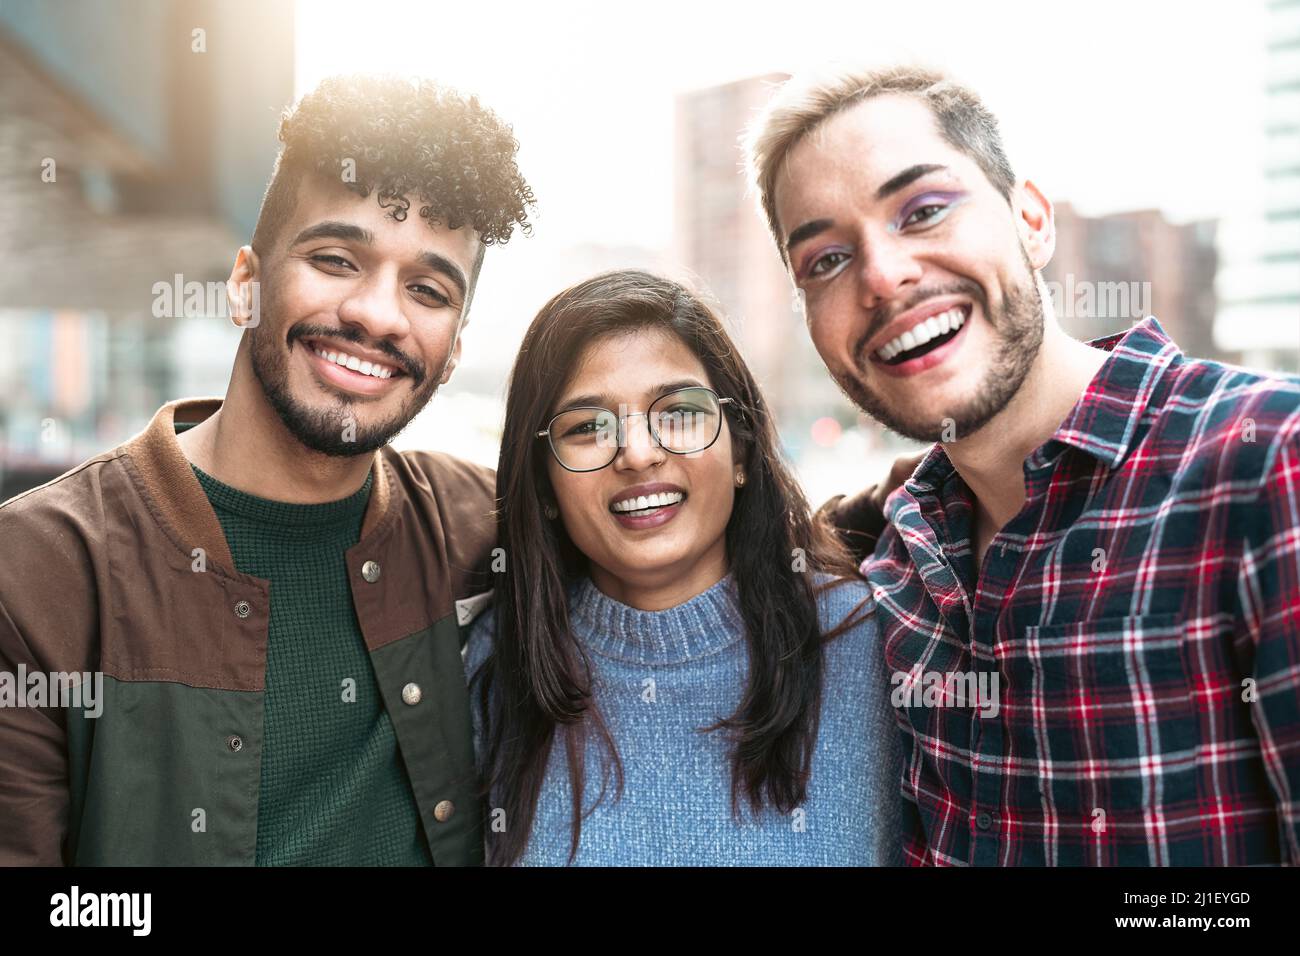 Portrait of young friends with diverse race and culture - Friendship and diversity concept Stock Photo